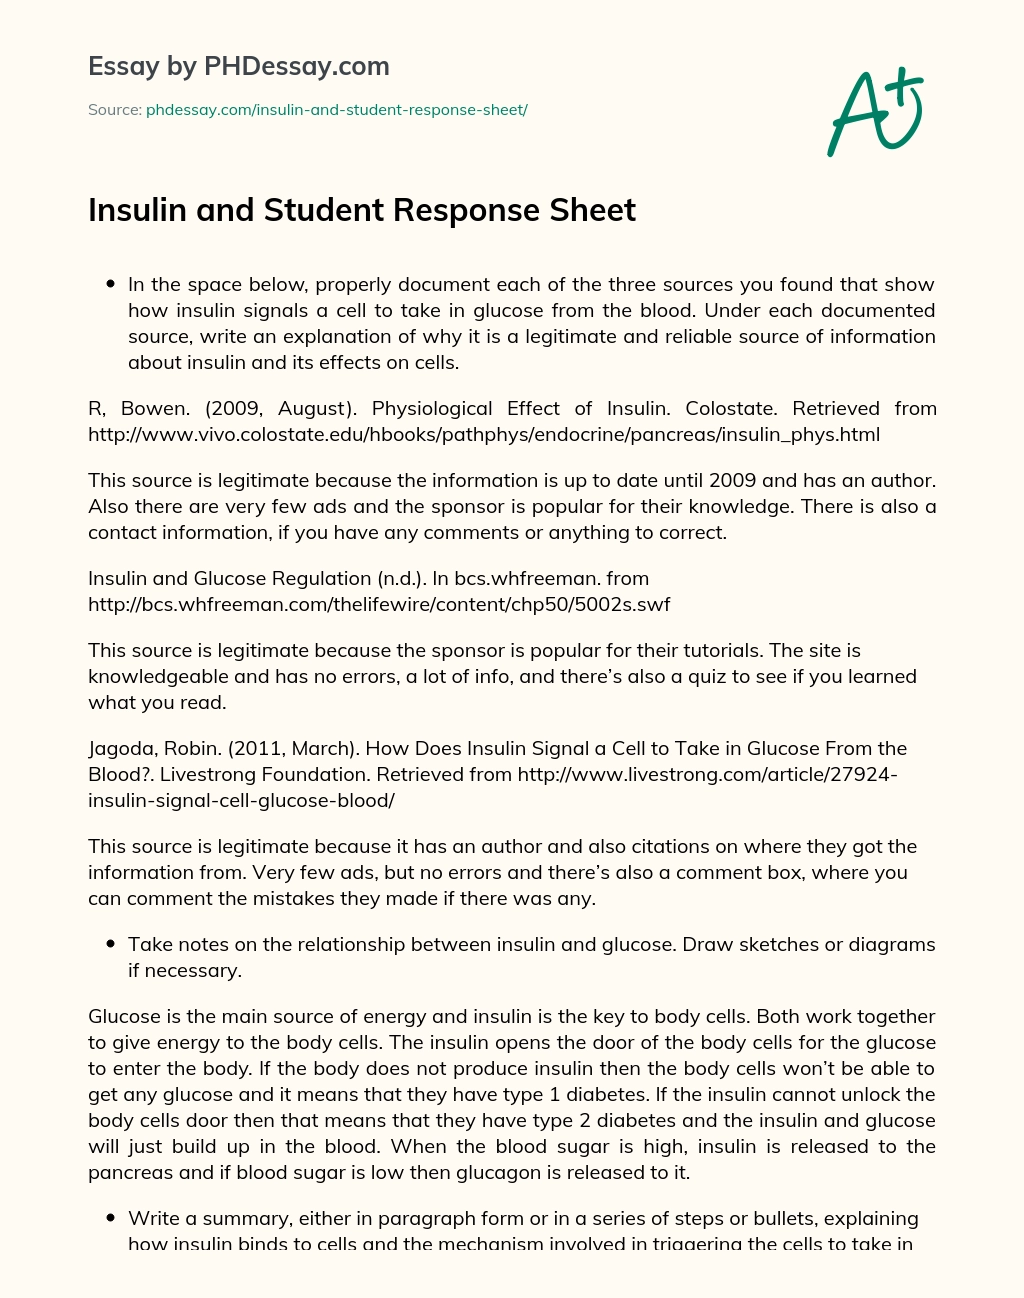 Insulin and Student Response Sheet essay